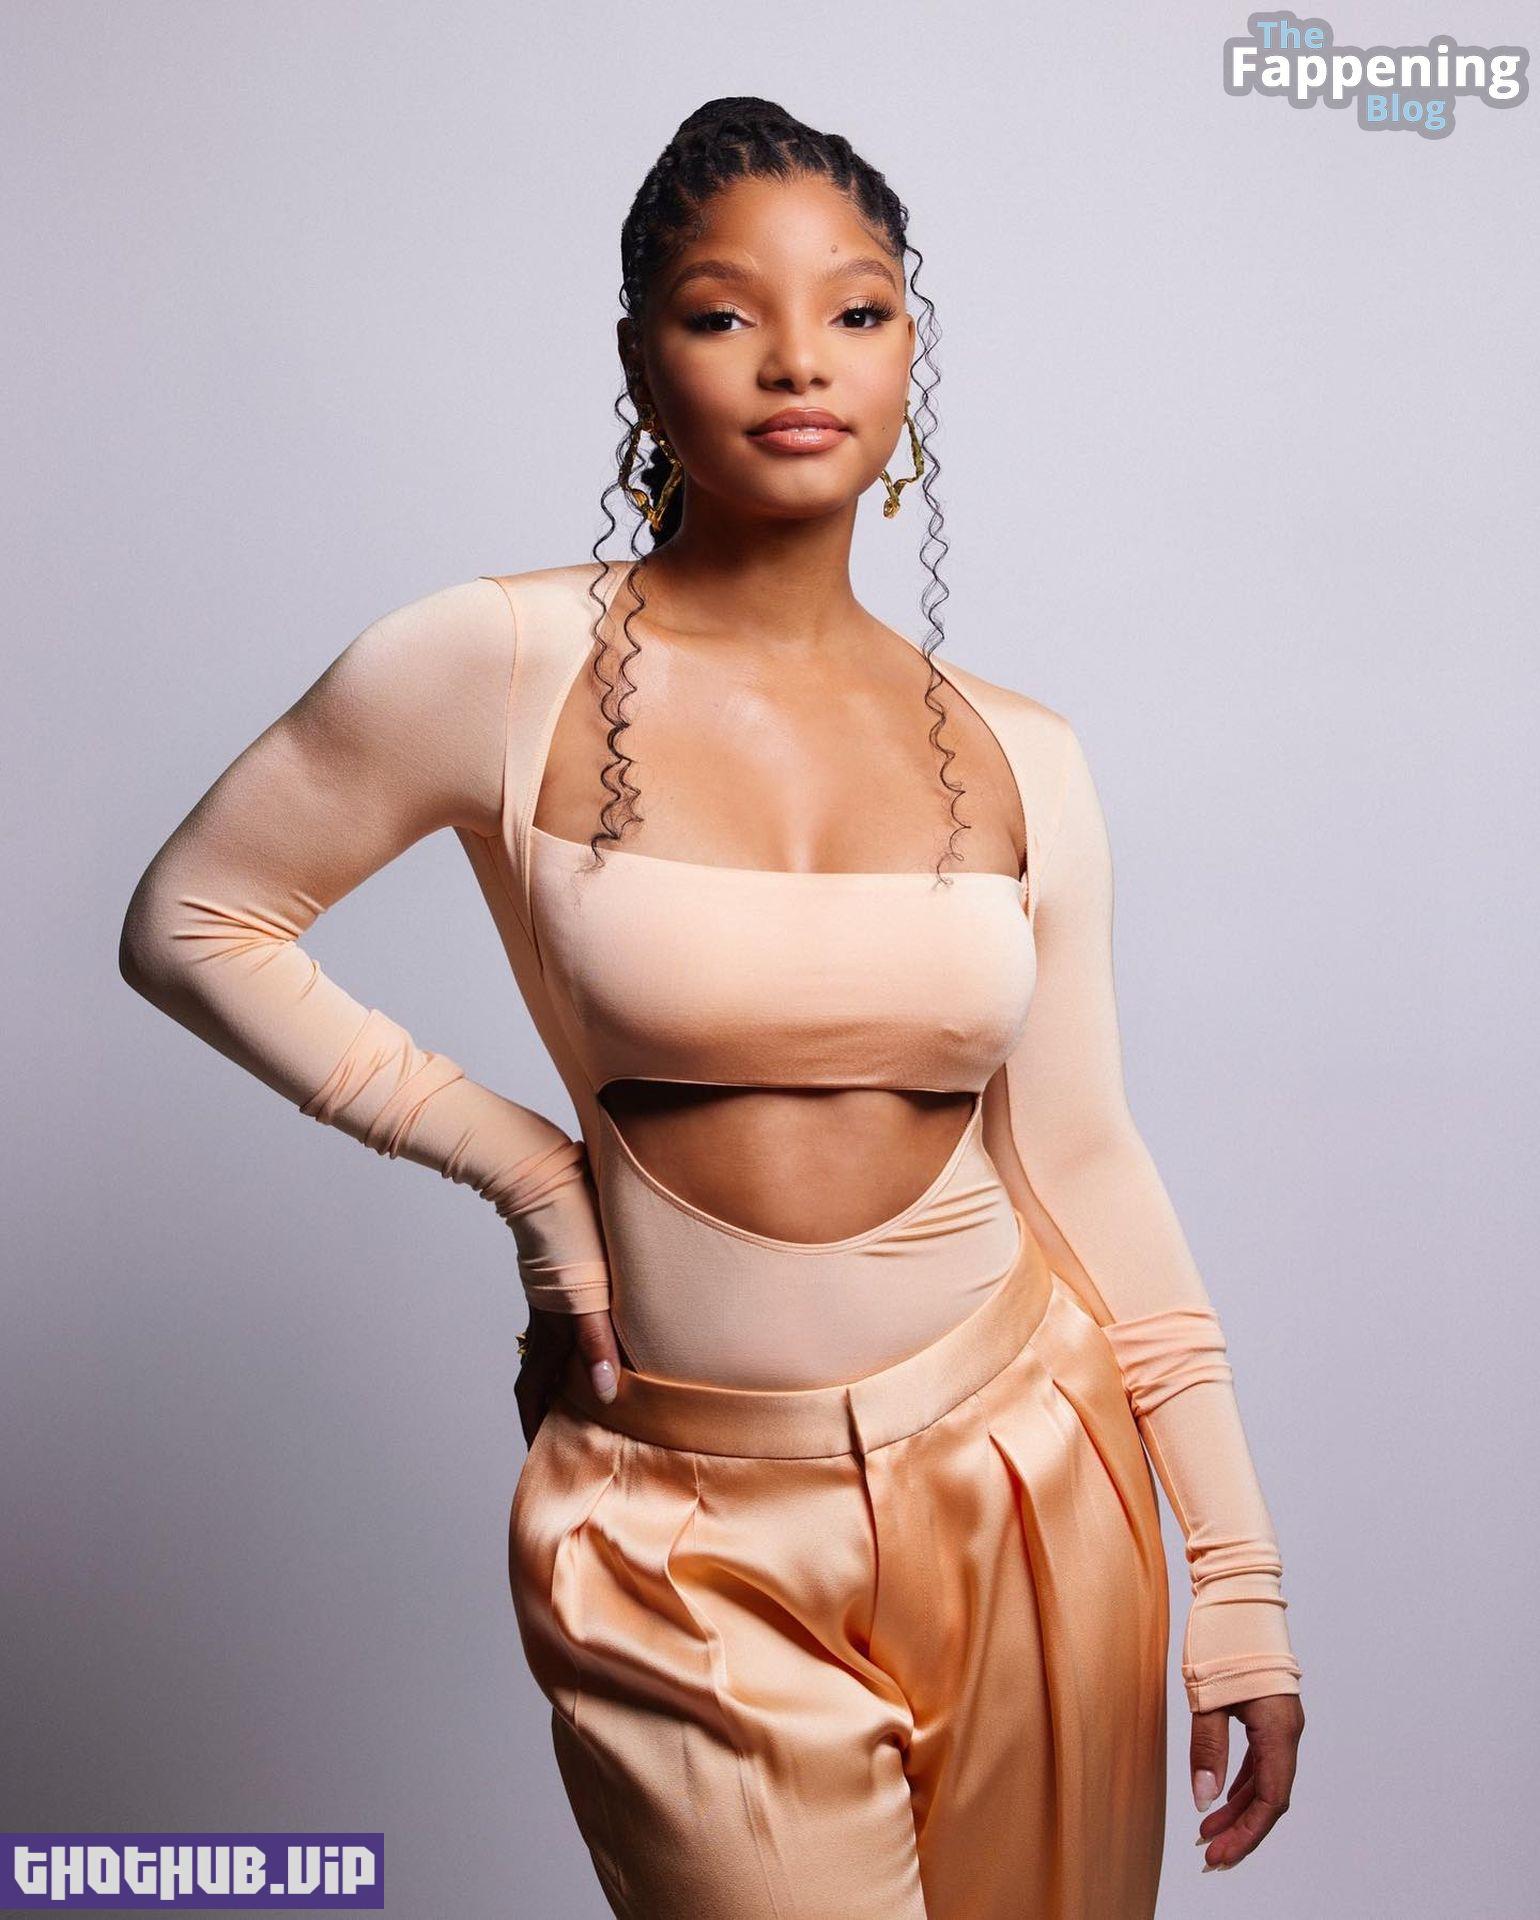 Halle Bailey Sexy The Fappening Blog 1 1